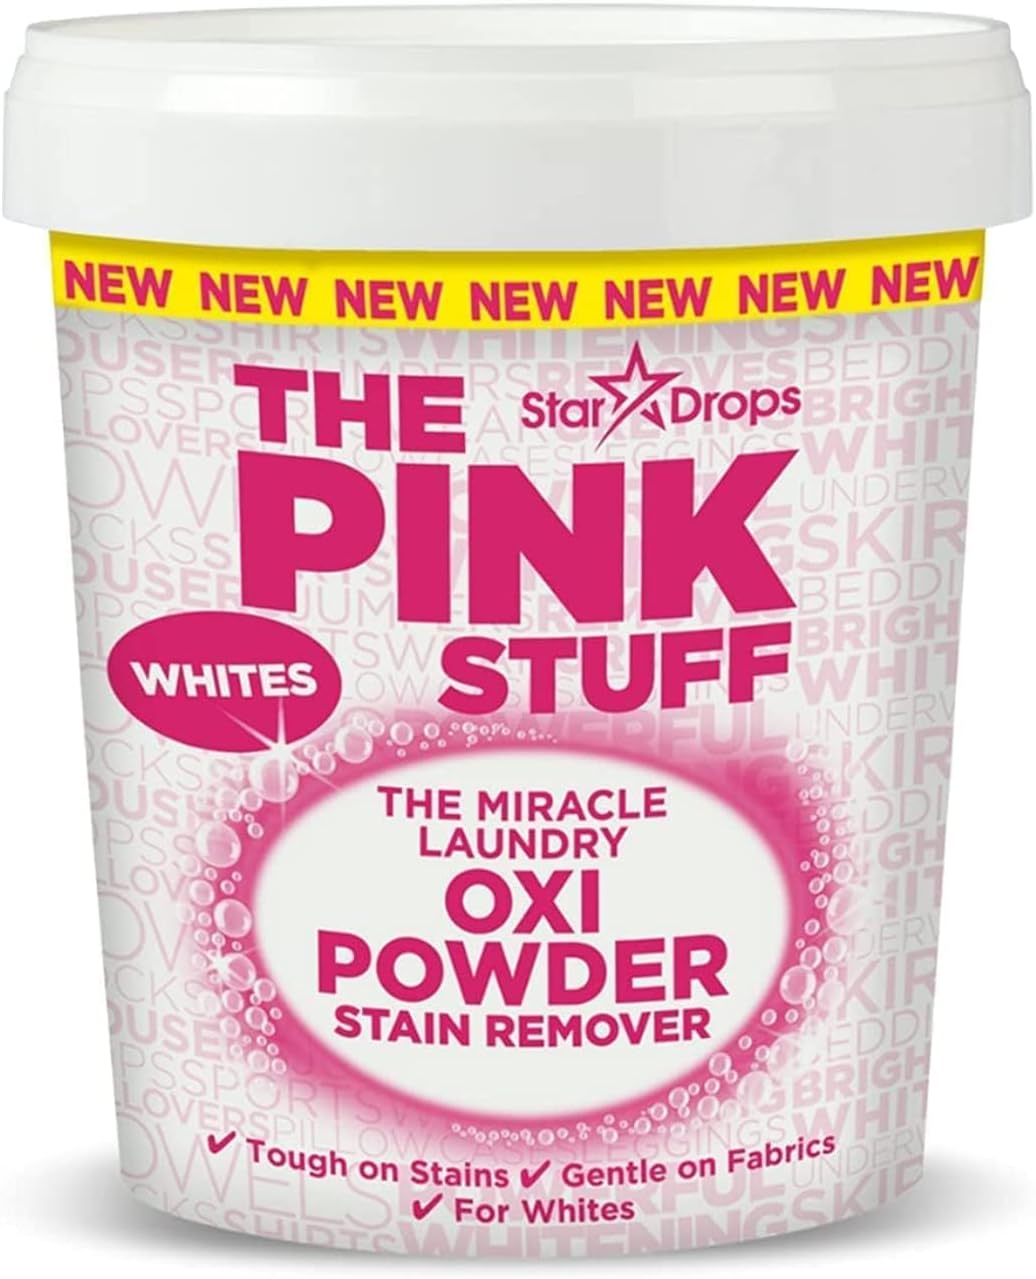 Stardrops - The Pink Stuff - The Miracle Laundry Oxi Powder Stain Remover Specifically Formulated for Whites, 1 kg